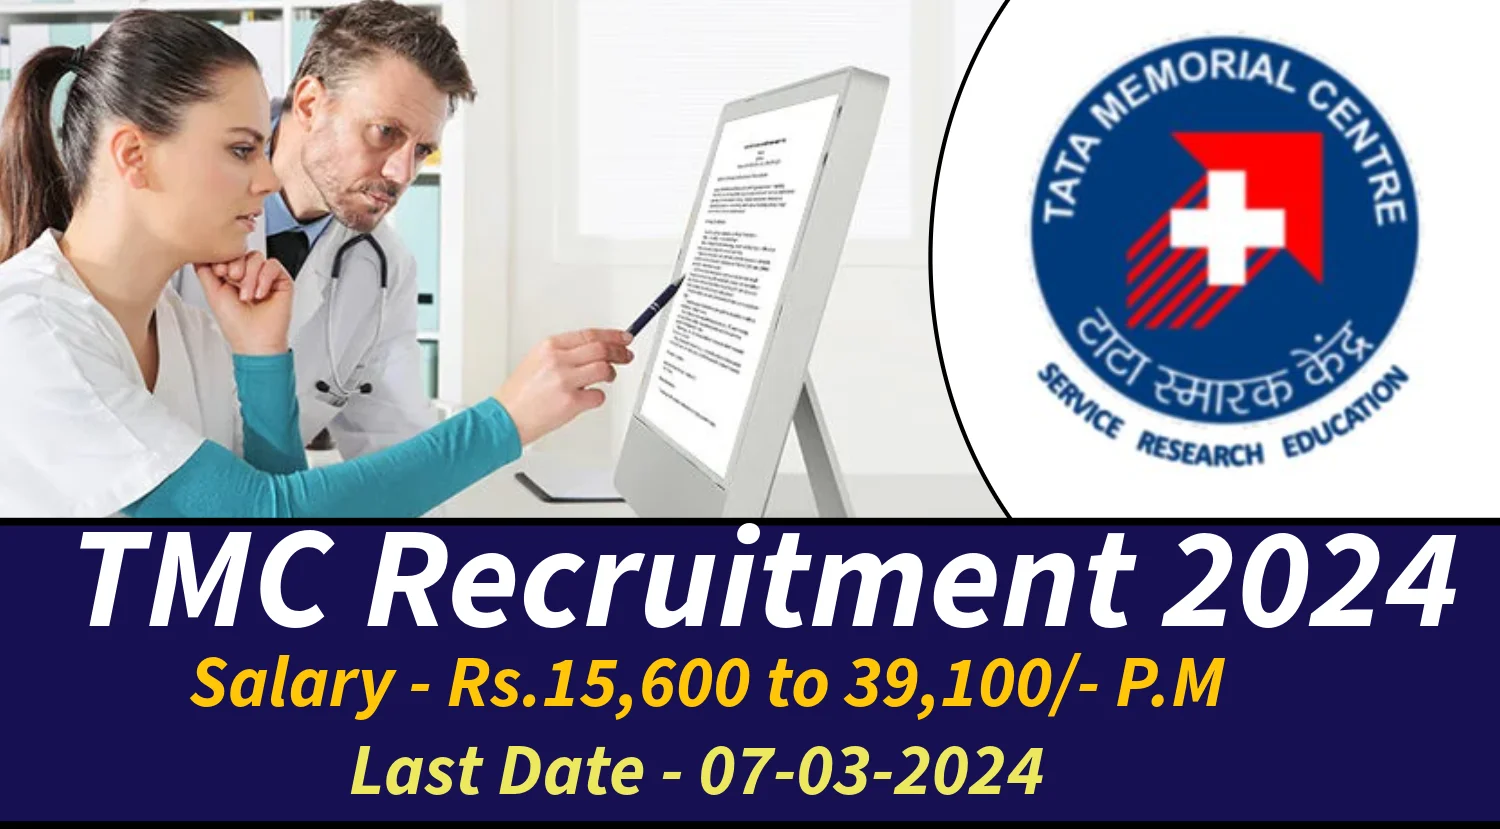 TMC Recruitment 2024 Notification Out for LDC, Technician and More